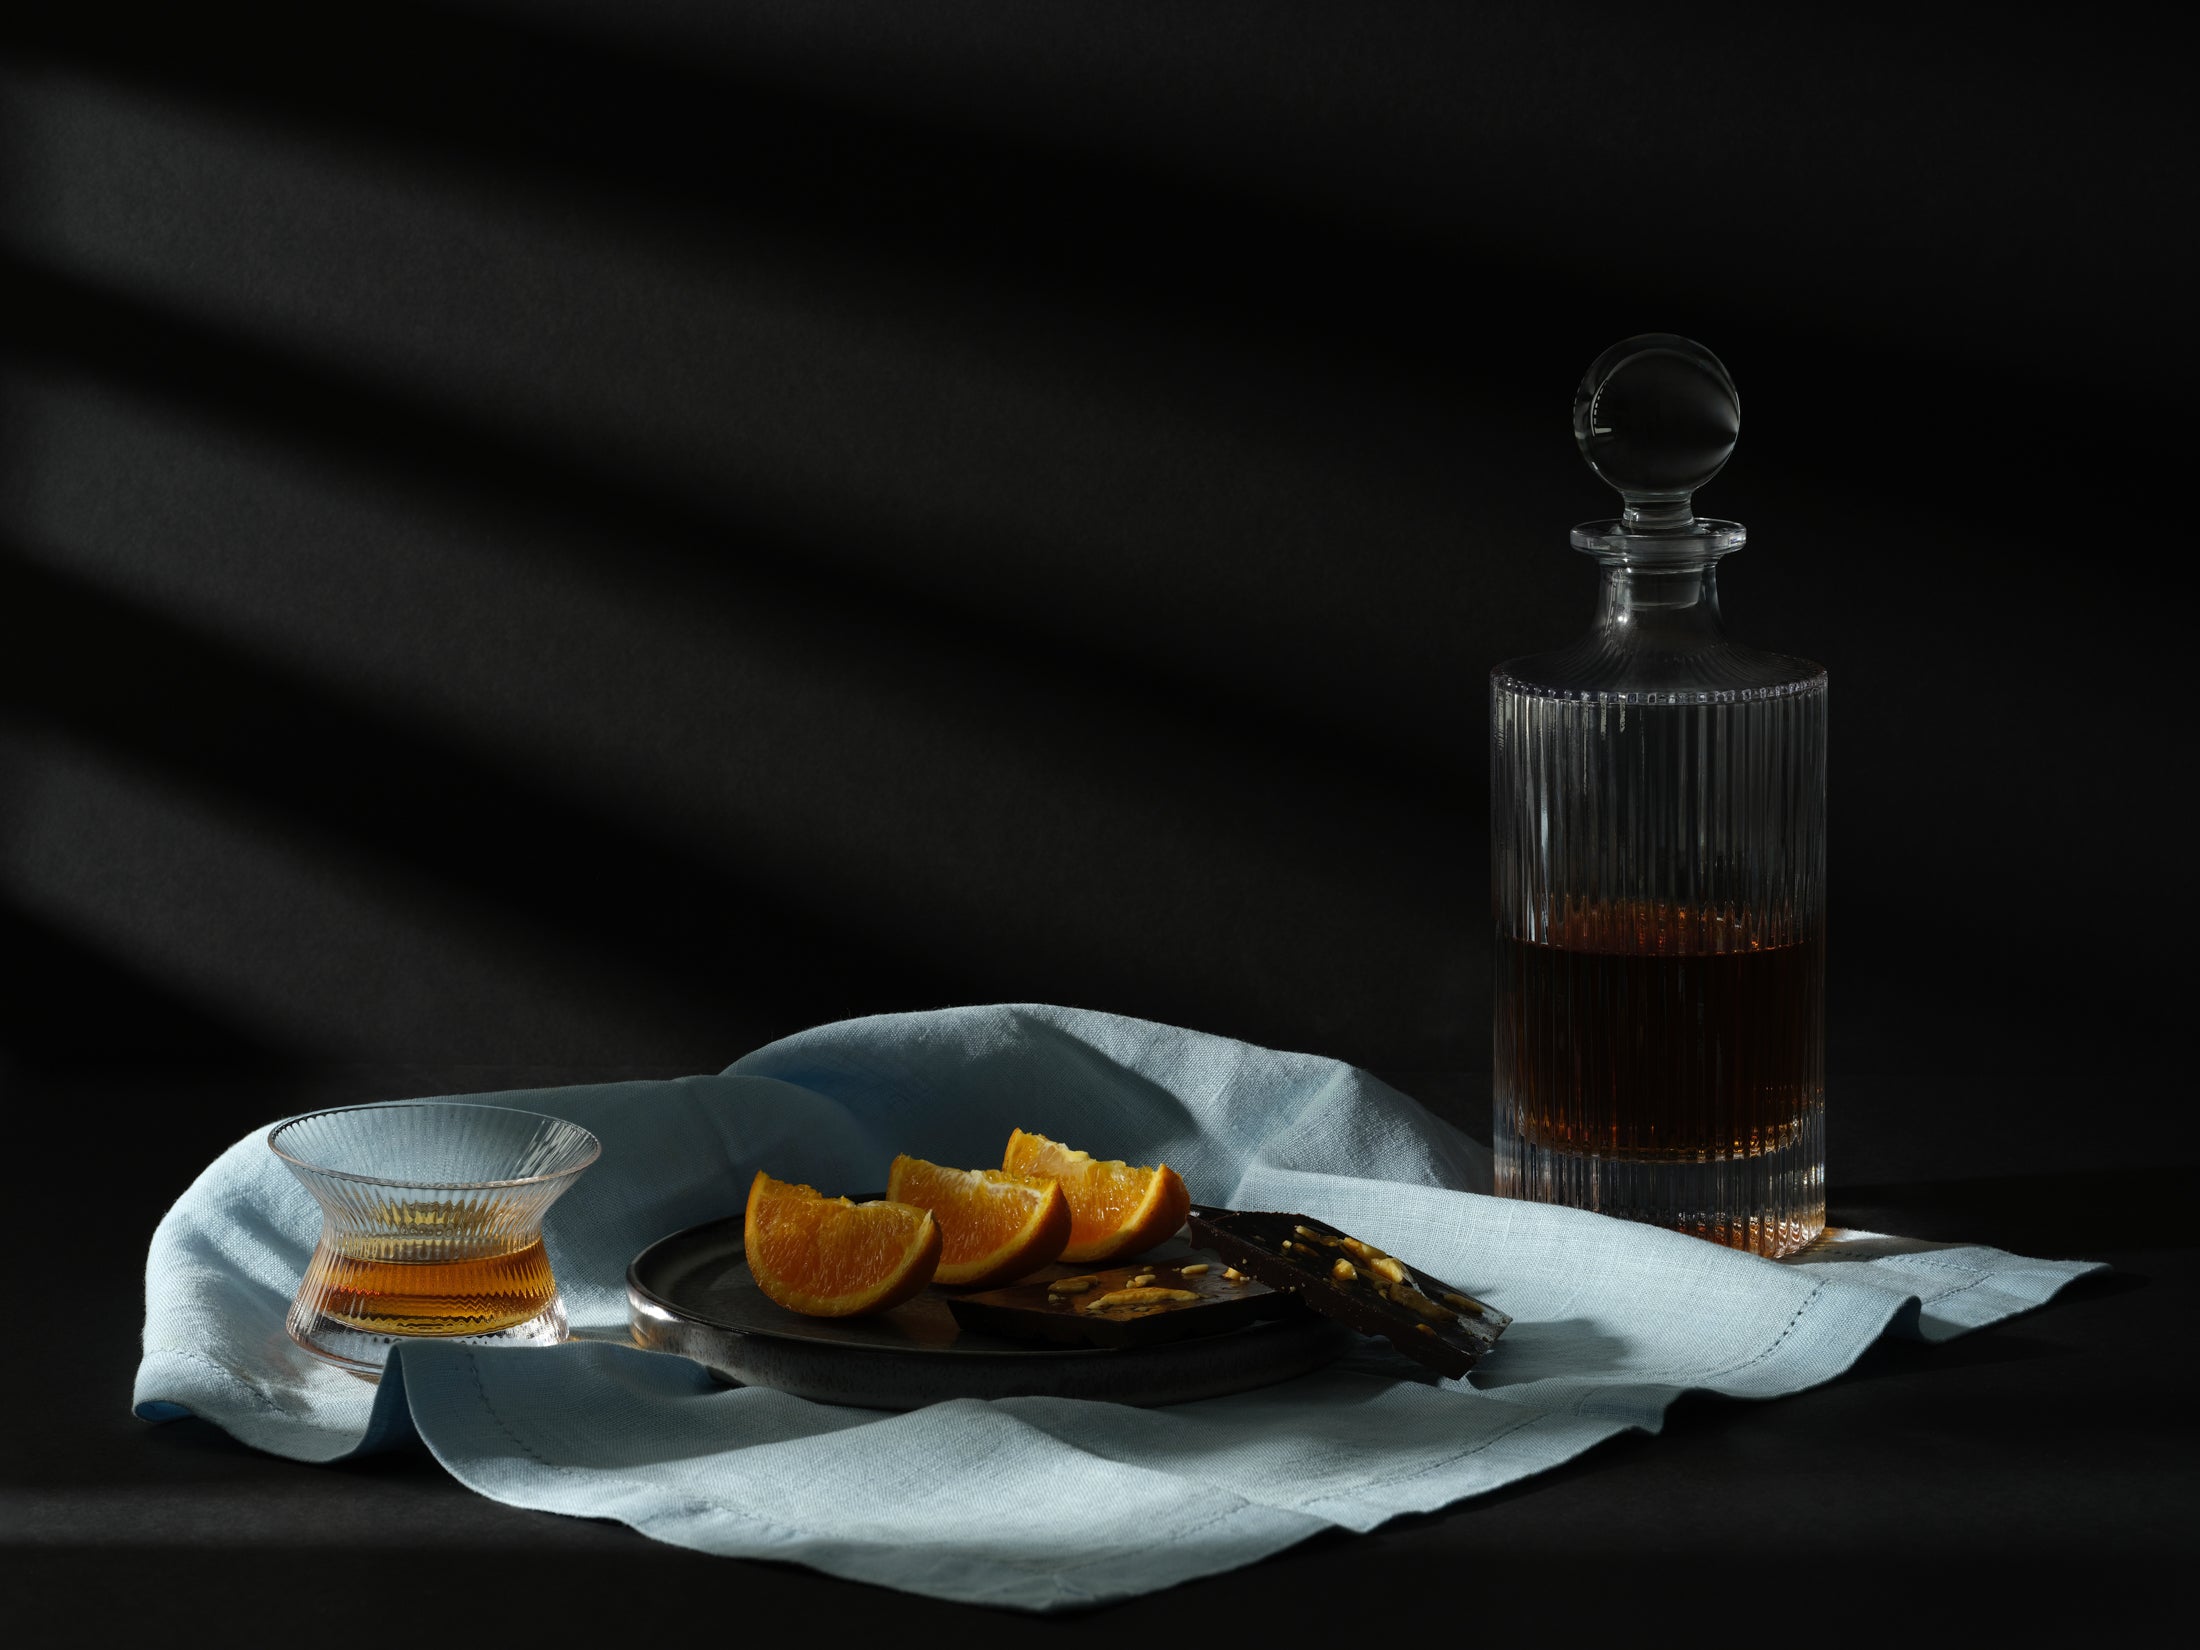 A Malt & Brew Hanyu Glass sits on a blue cloth with oranges, dark chocolate, and a whisky decanter.